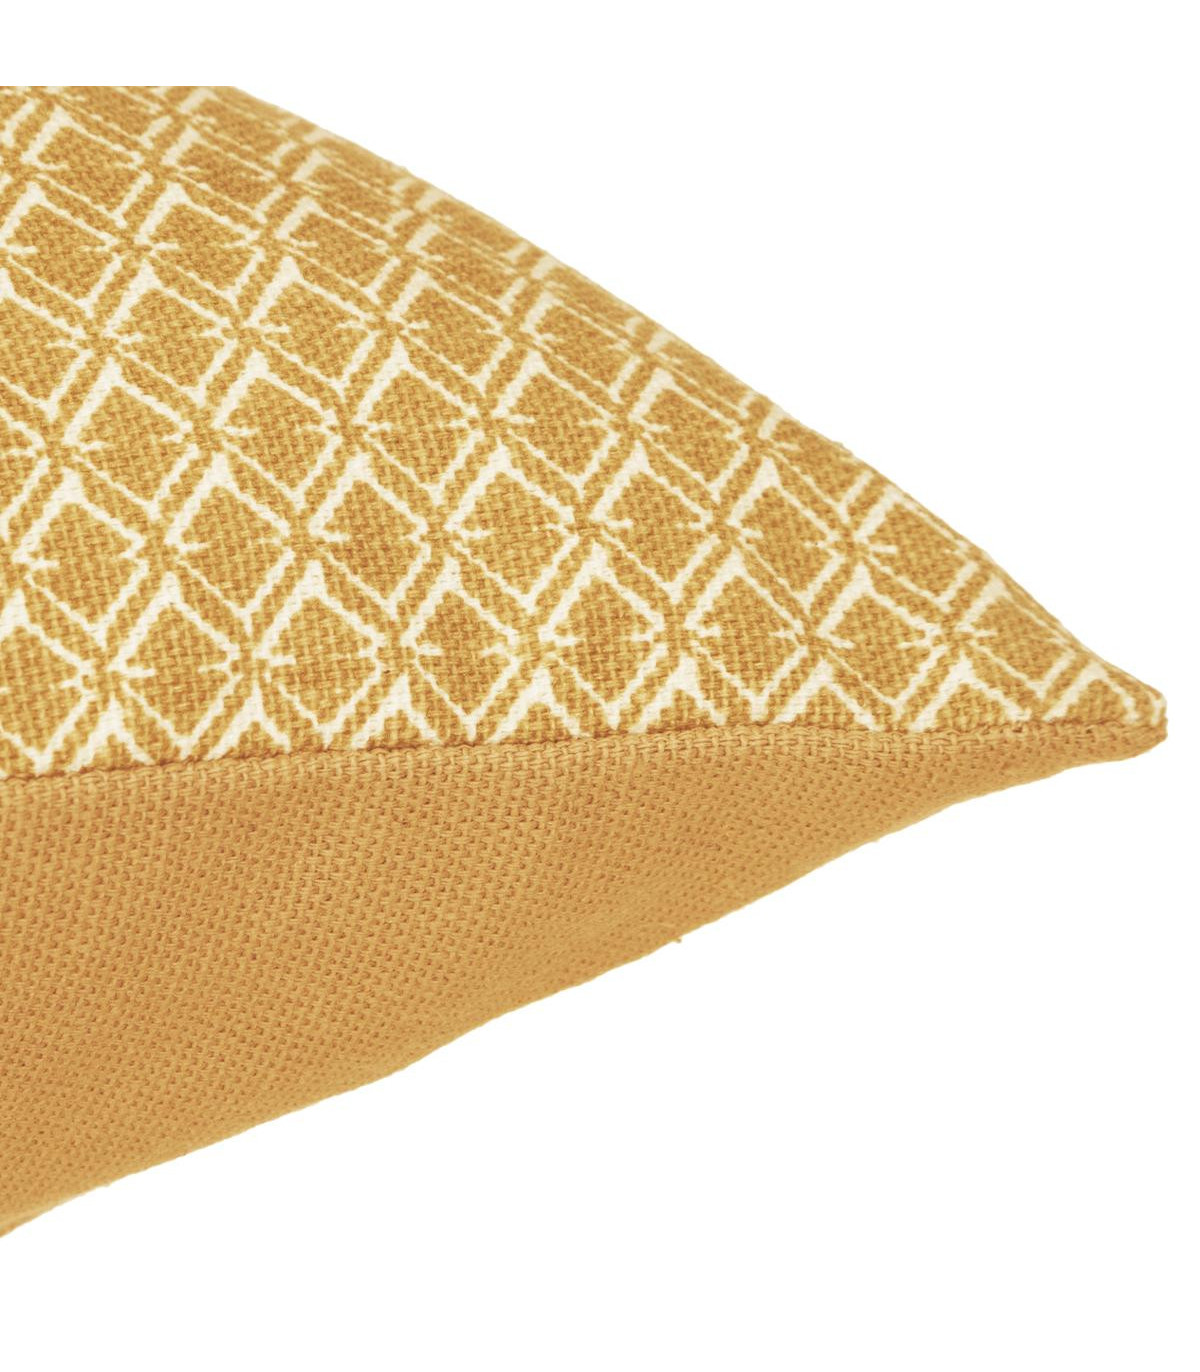 coussin-motif-otto-ocre-38x38 (1)